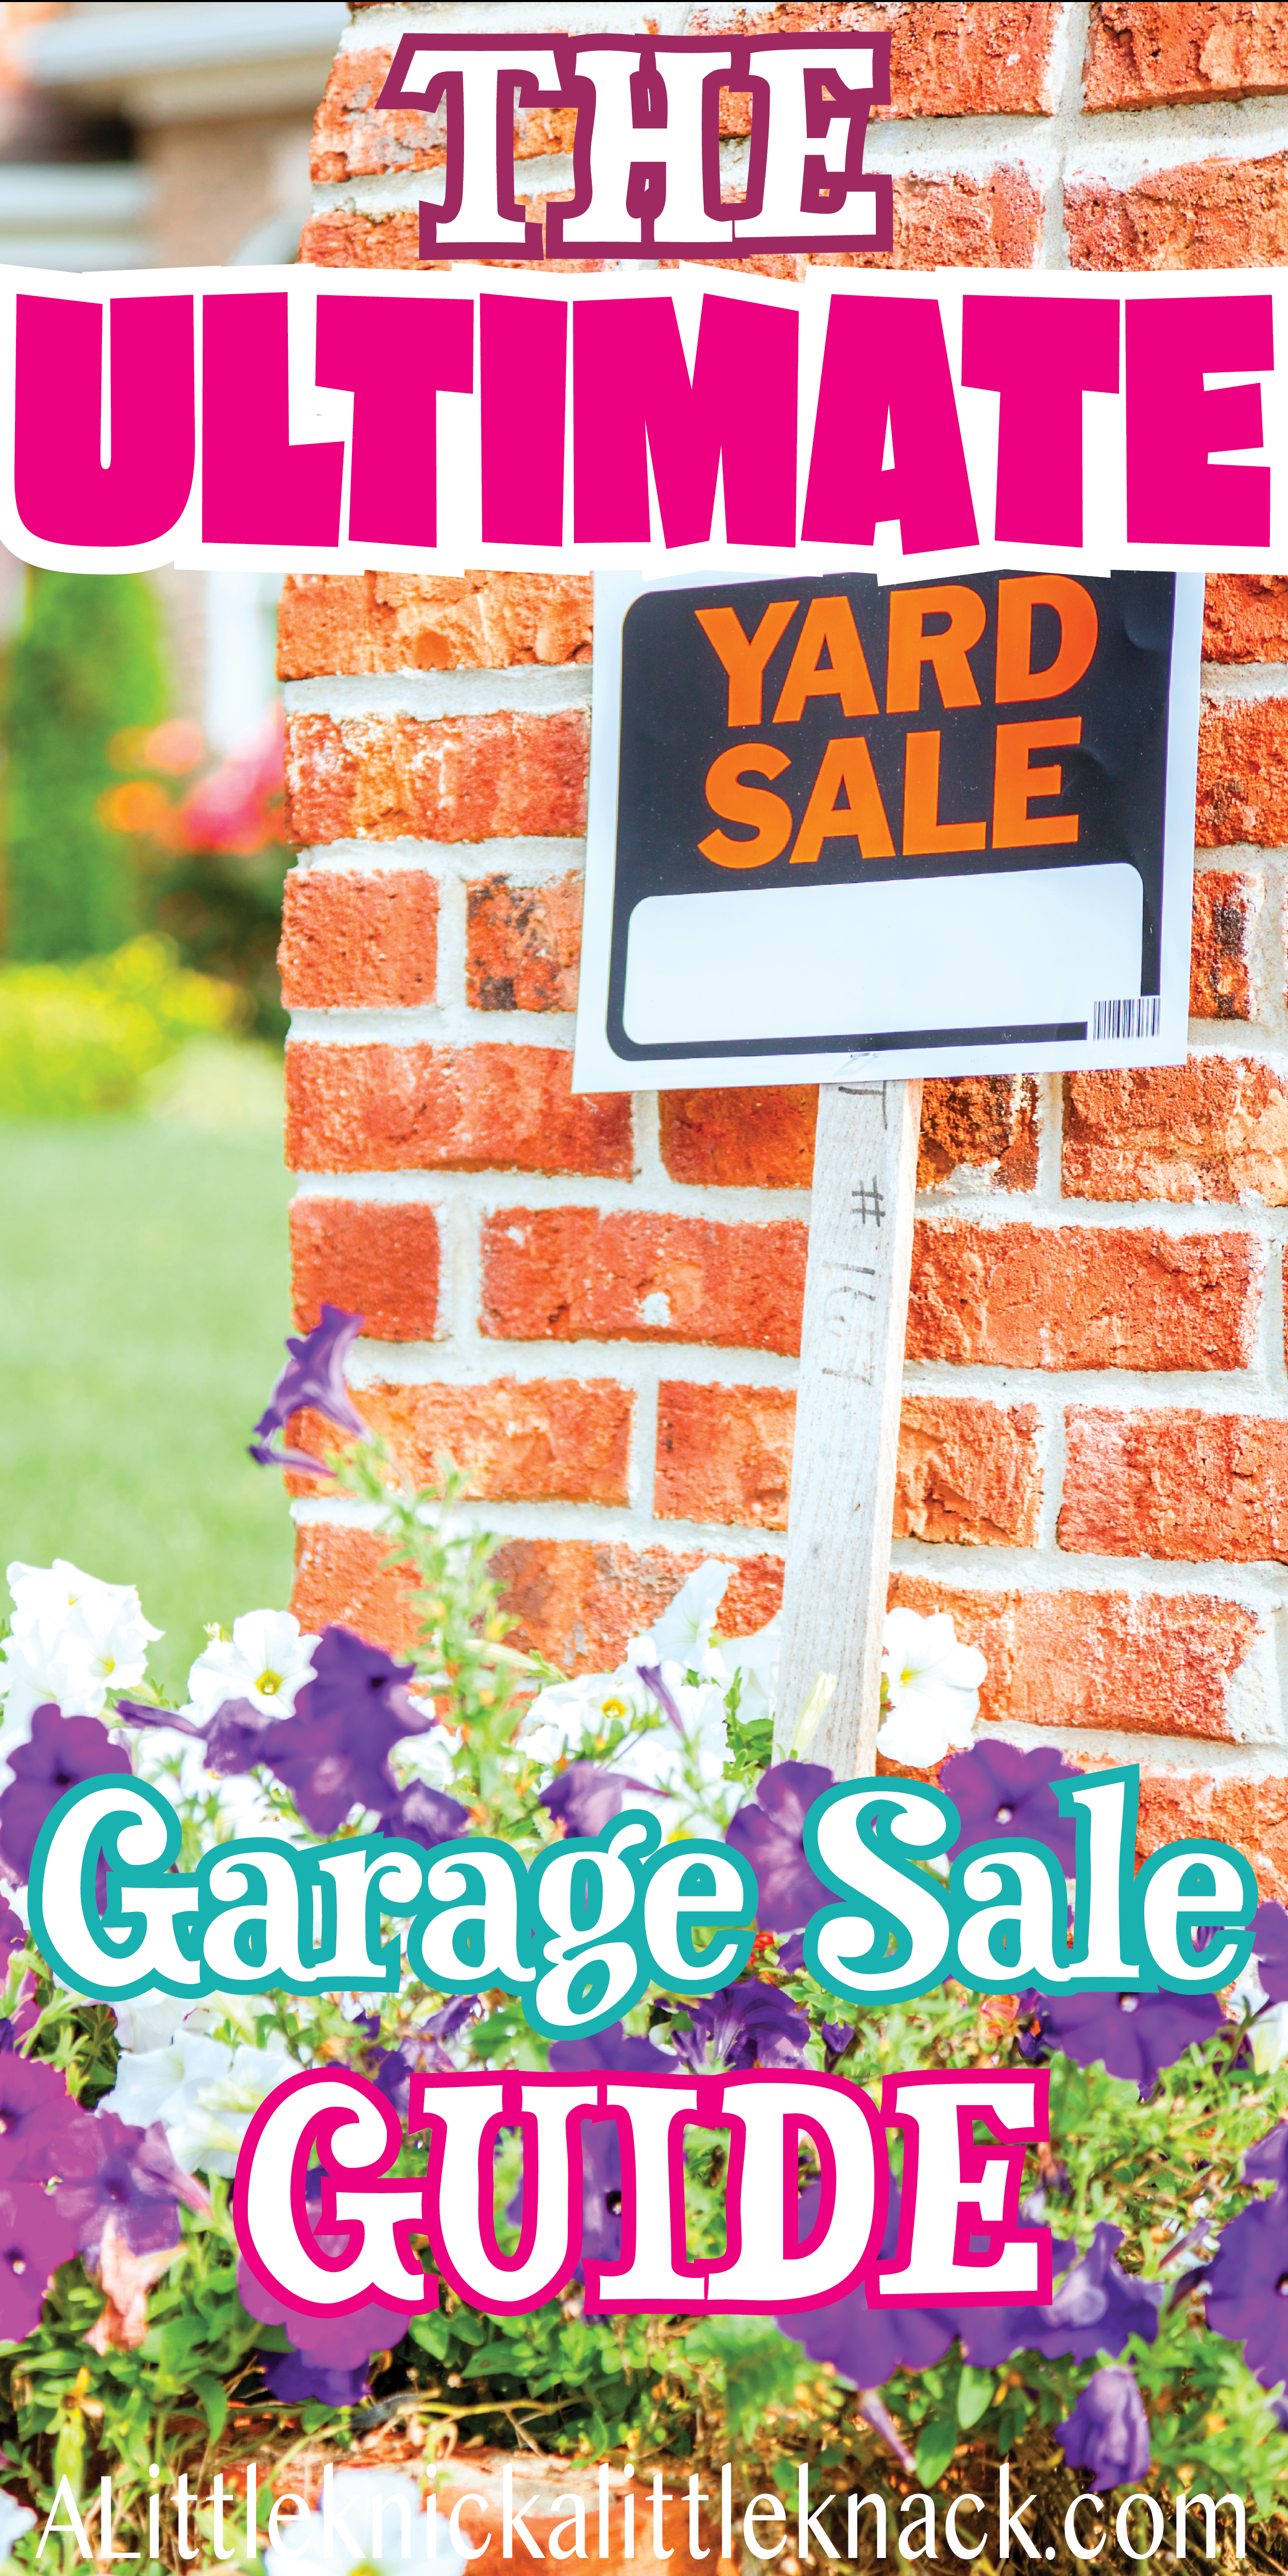 Yard sale sign in a colorful garden with a text overlay.